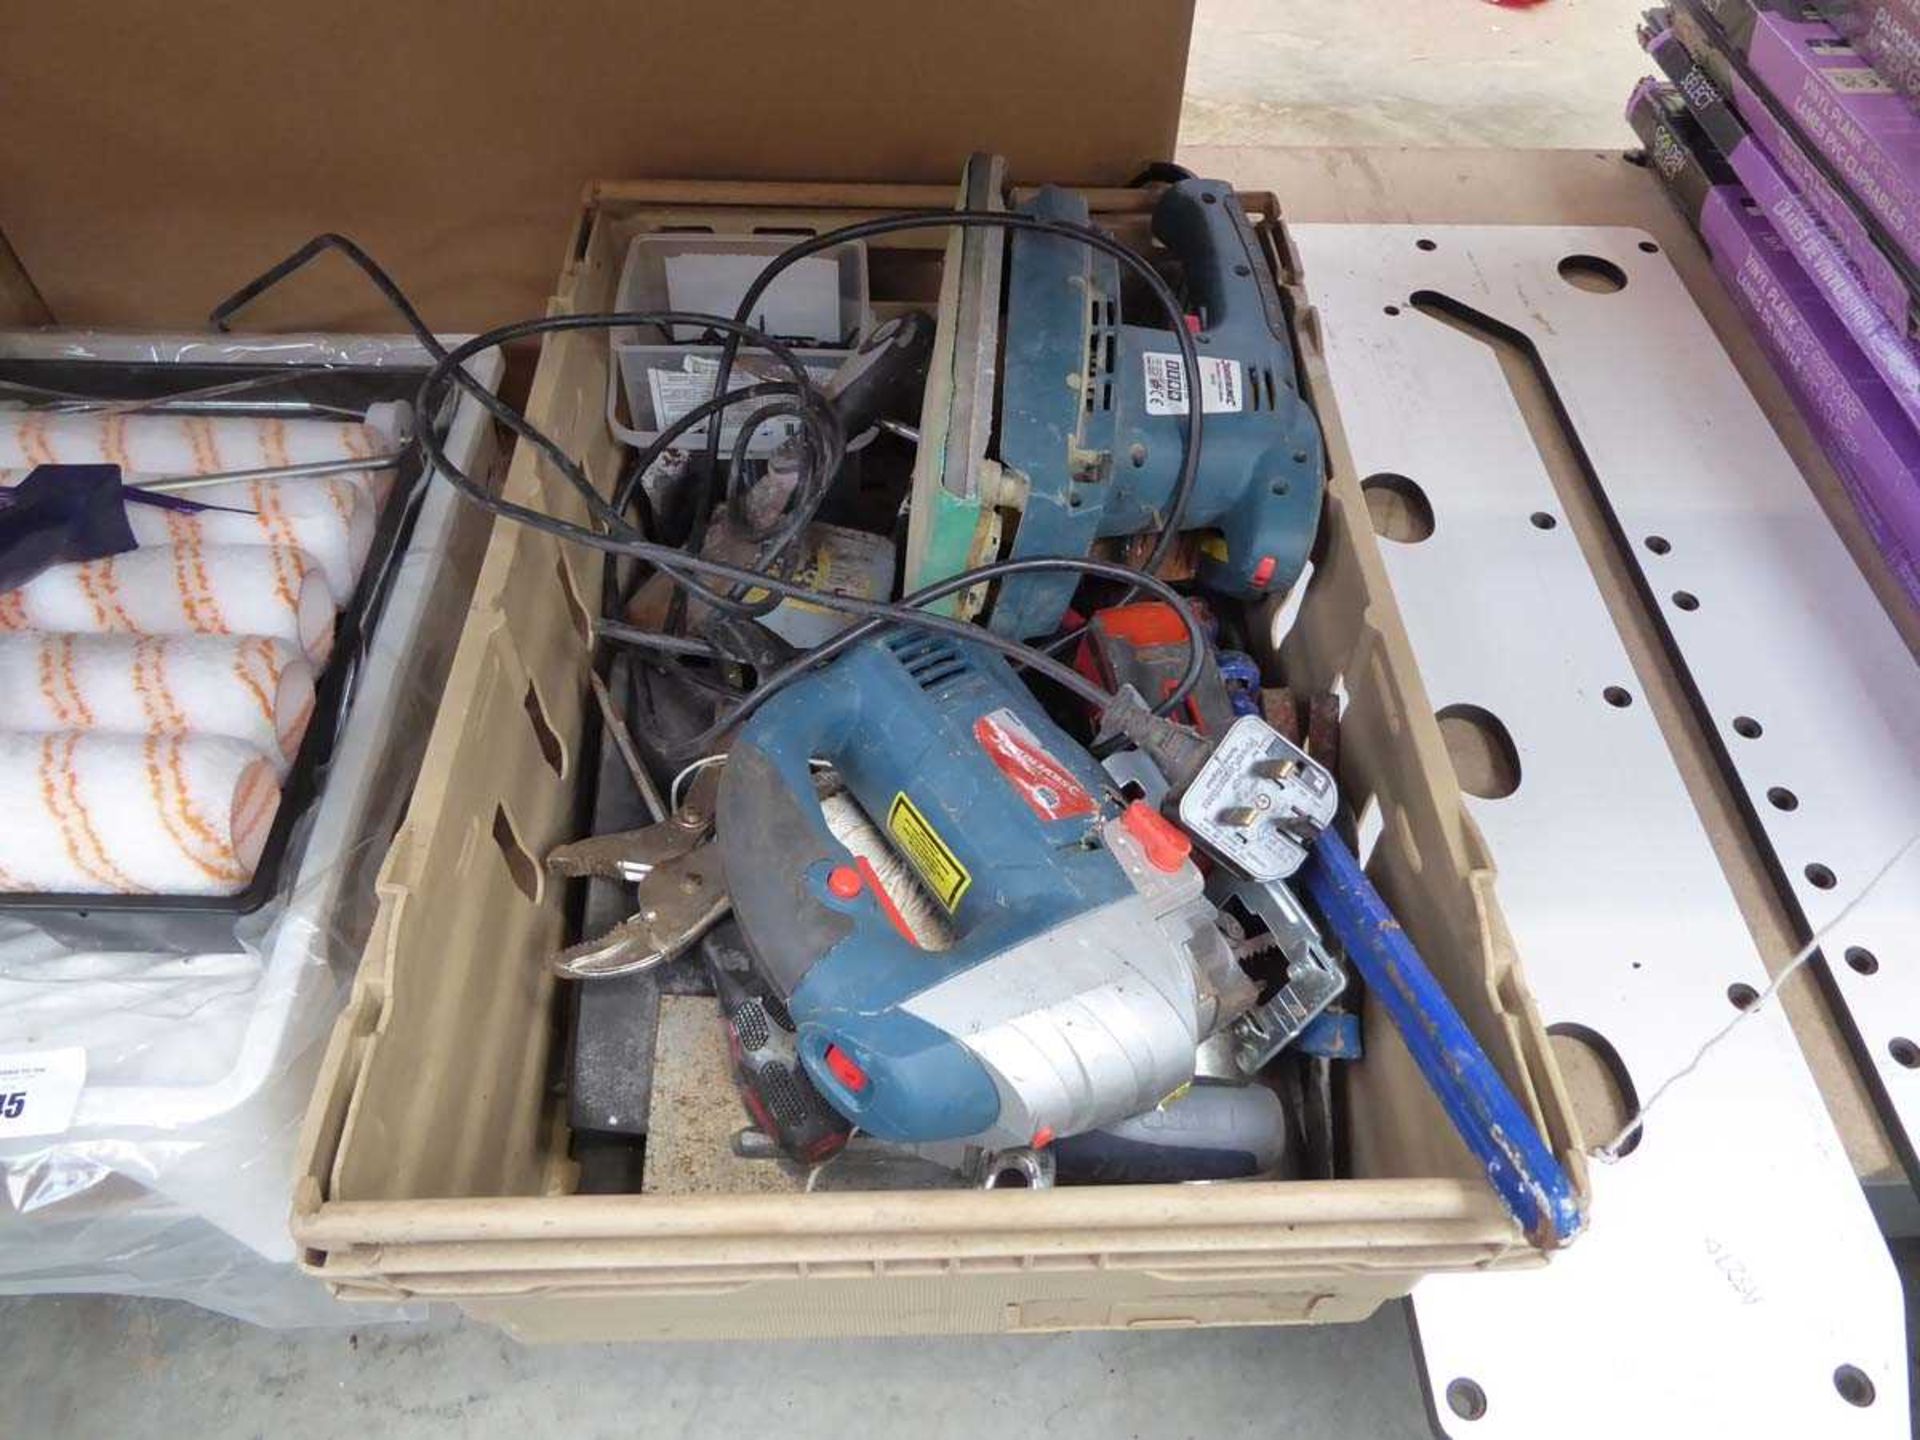 Crate of mixed tooling incl. jig saw, sander, etc.